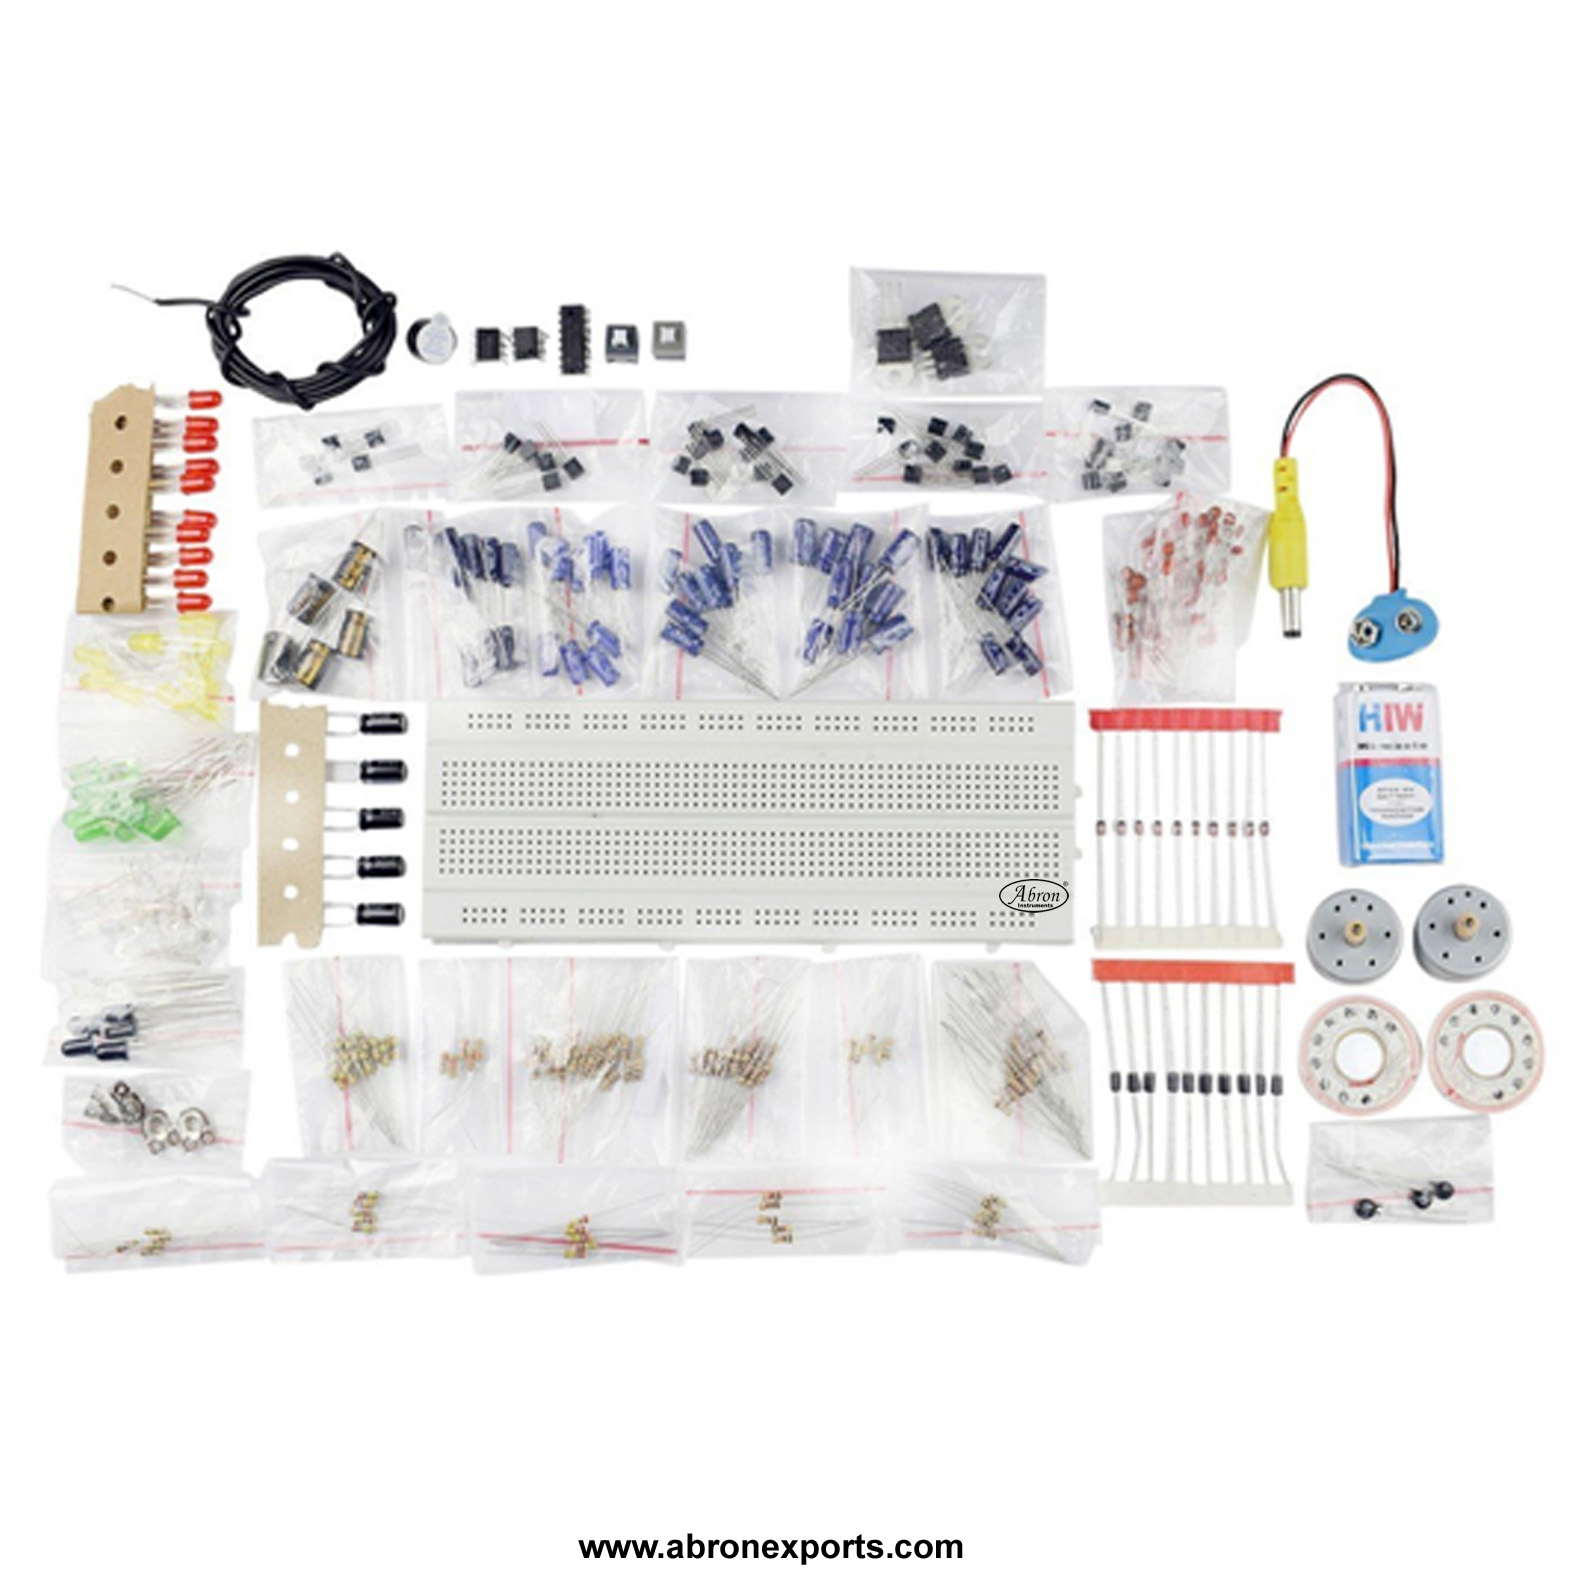 Components kit project electronic abron AE-1224kb